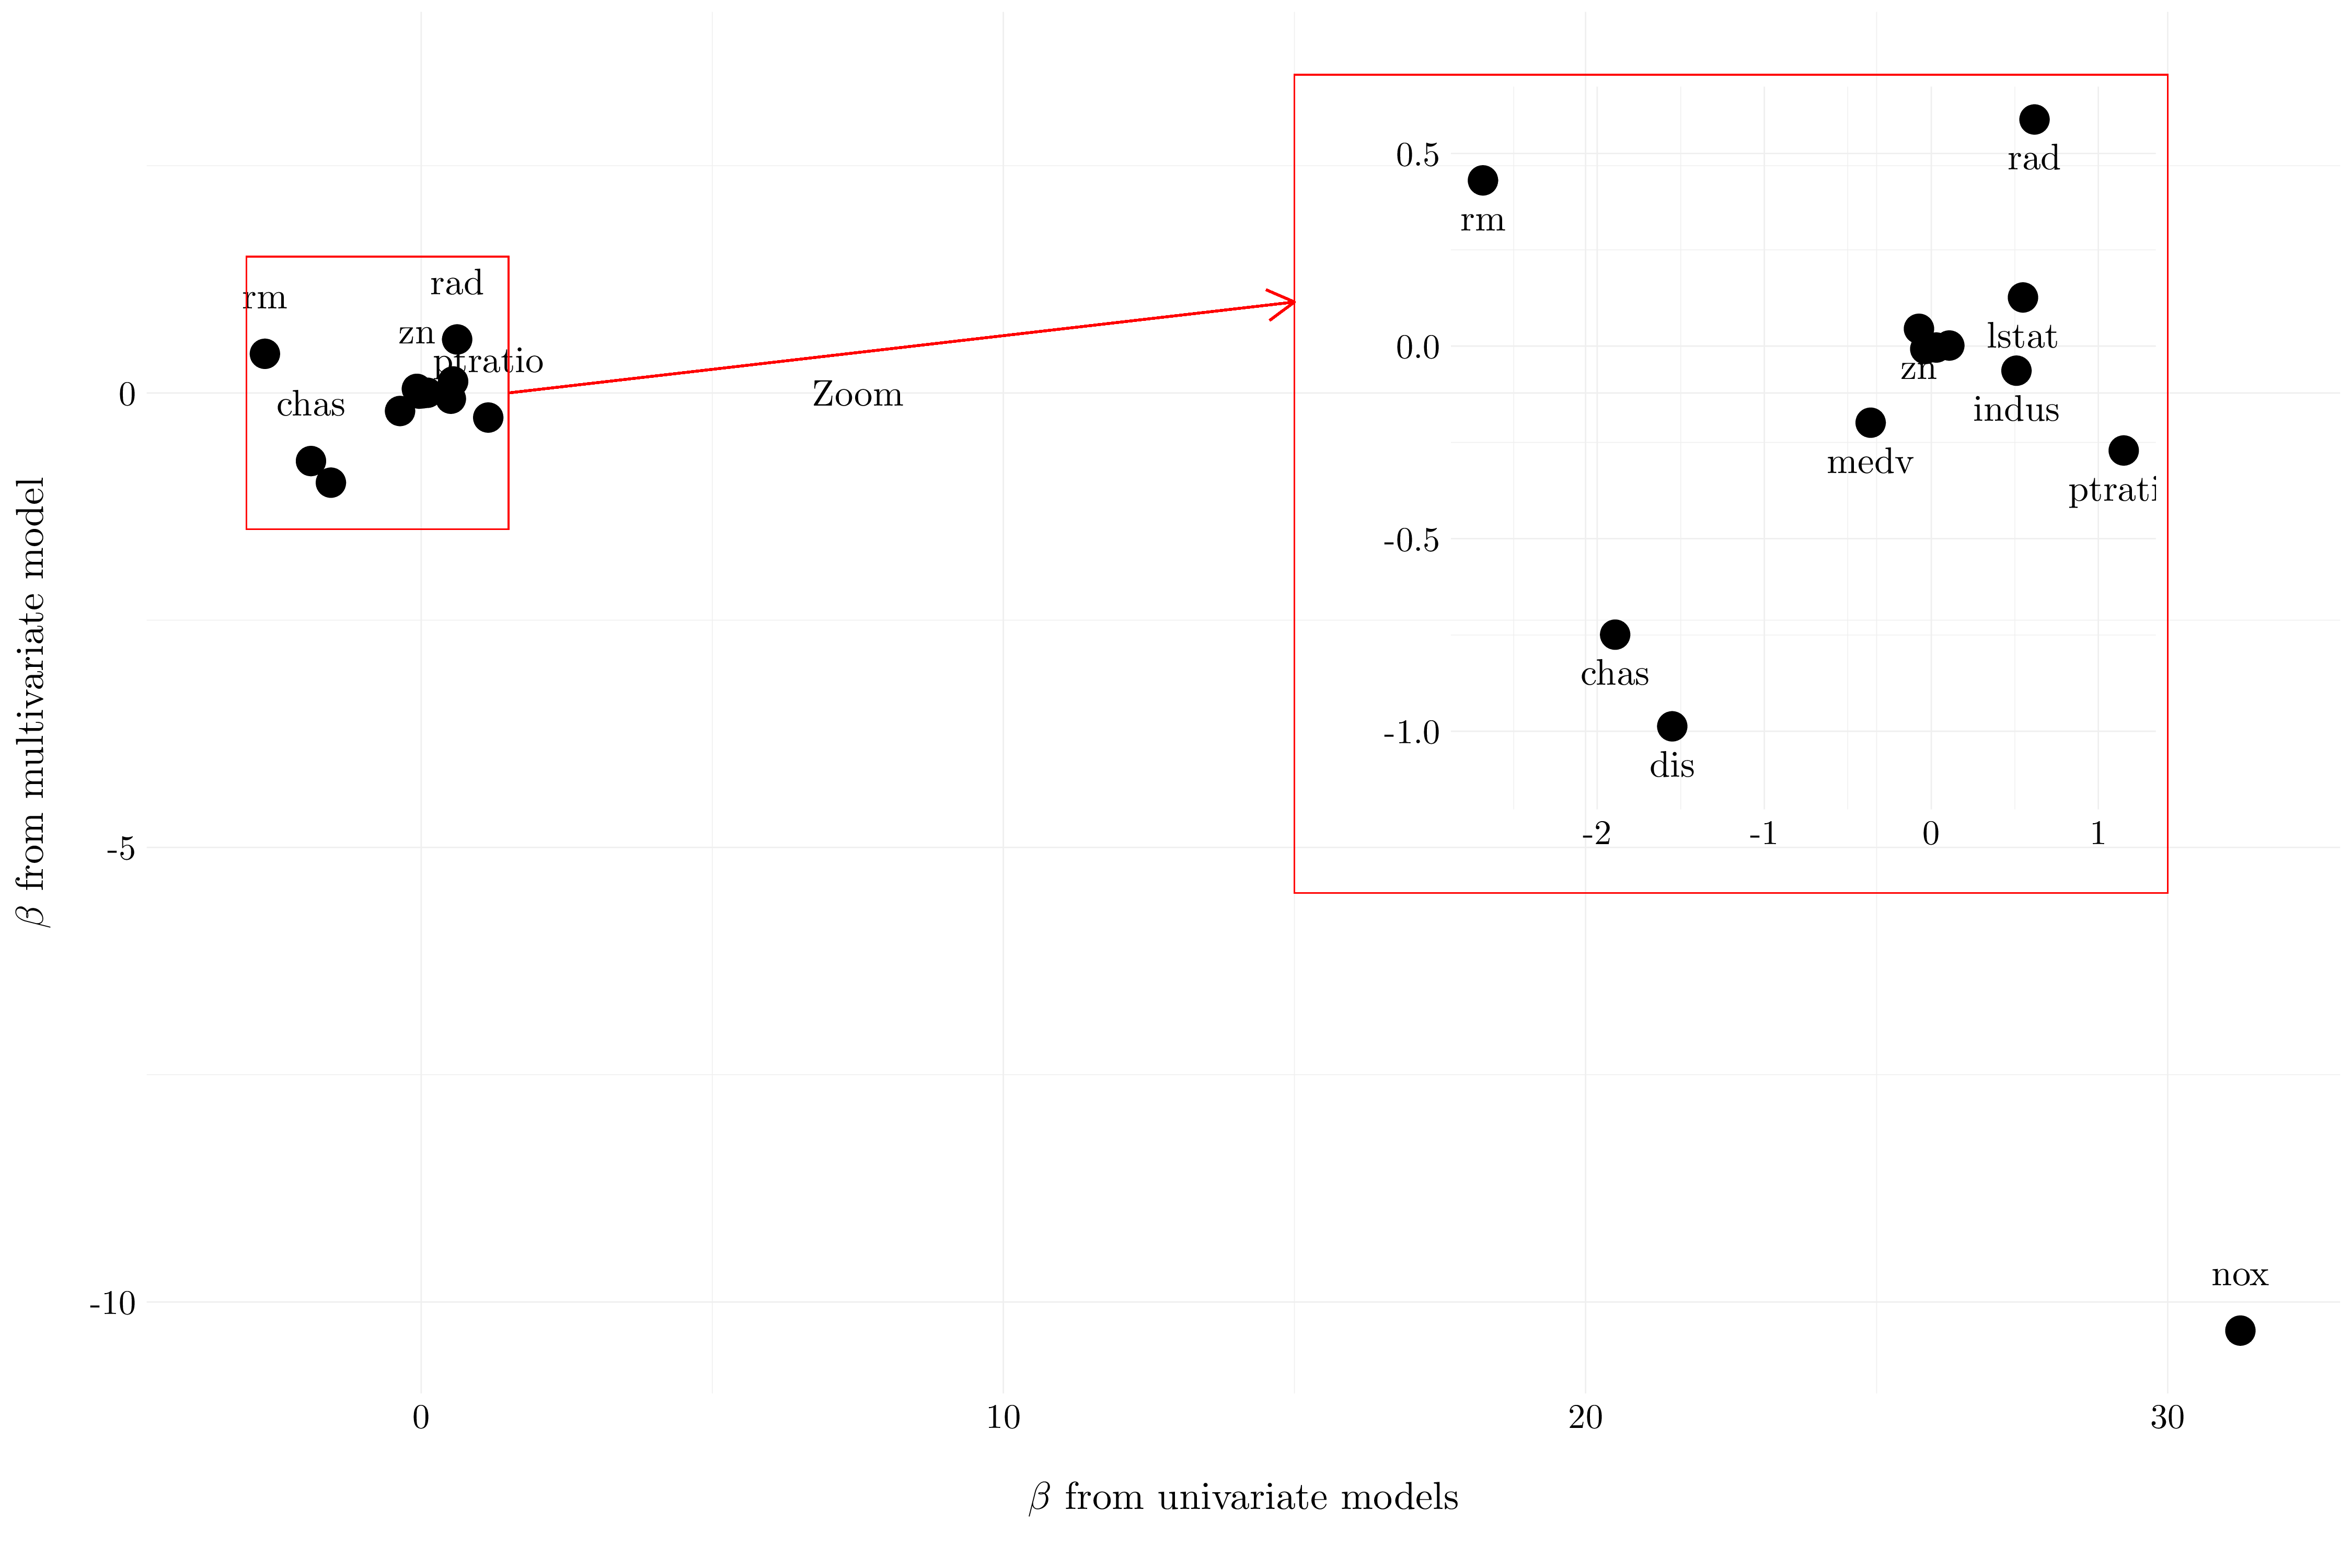 Plot of the coefficients from the univariate models against the multivariate model.